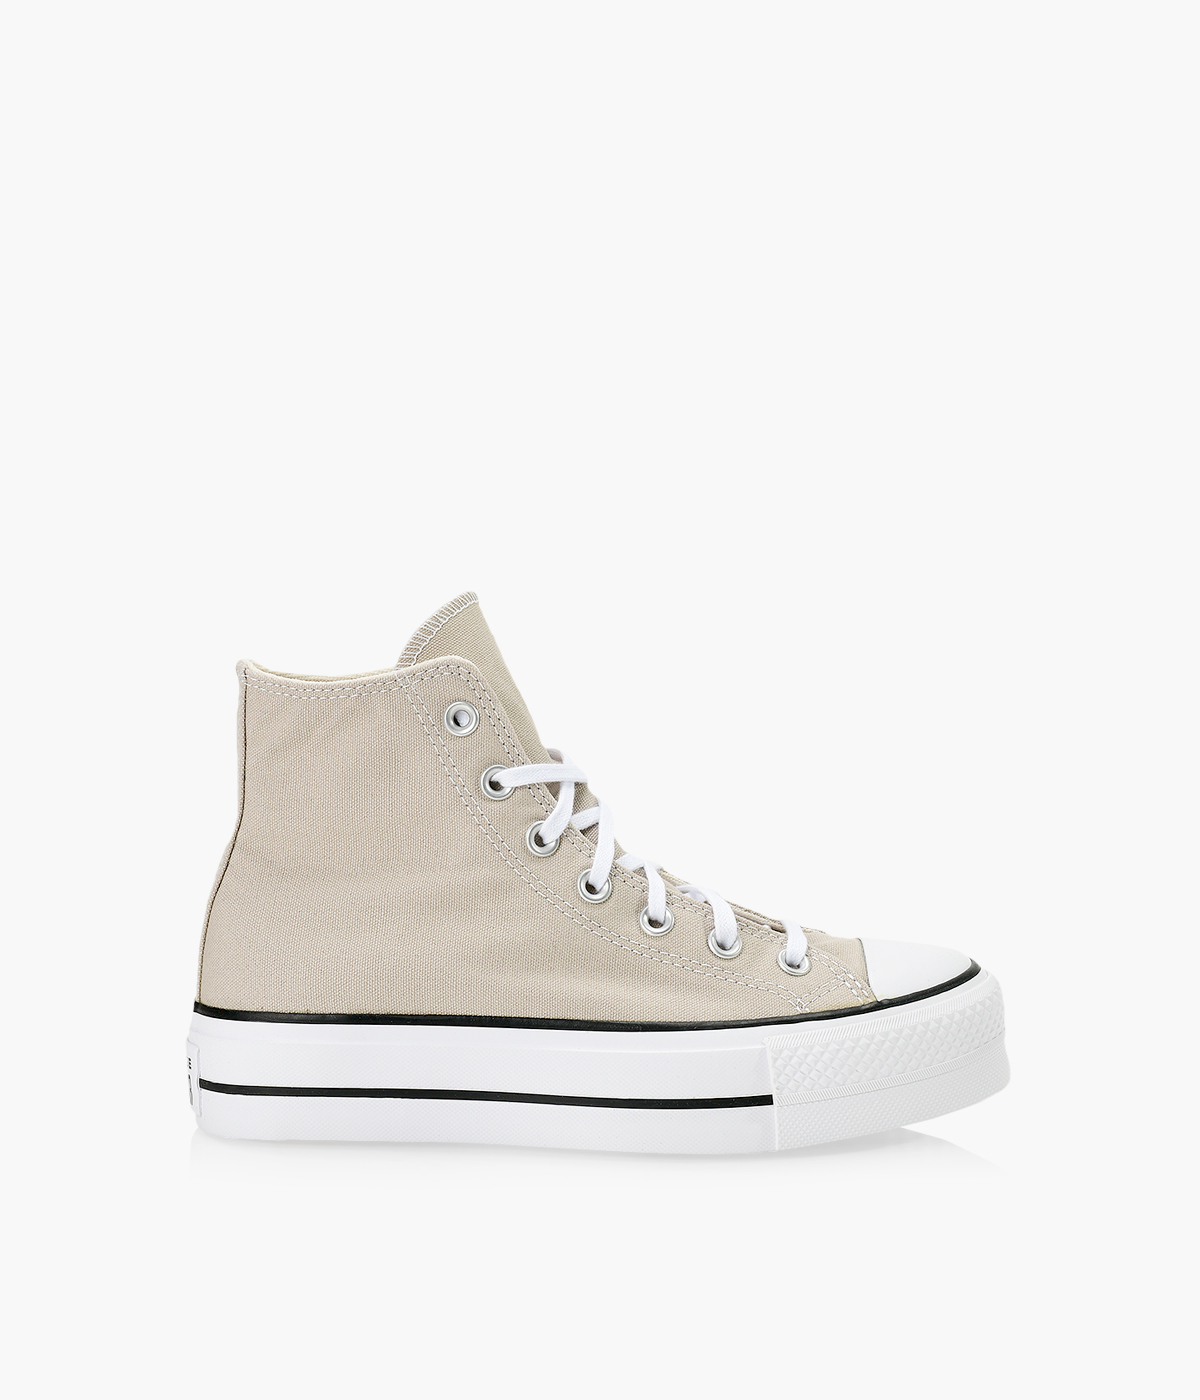 CONVERSE CHUCK TAYLOR ALL STAR PLATFORM HIGH TOP - Fabric | BrownsShoes